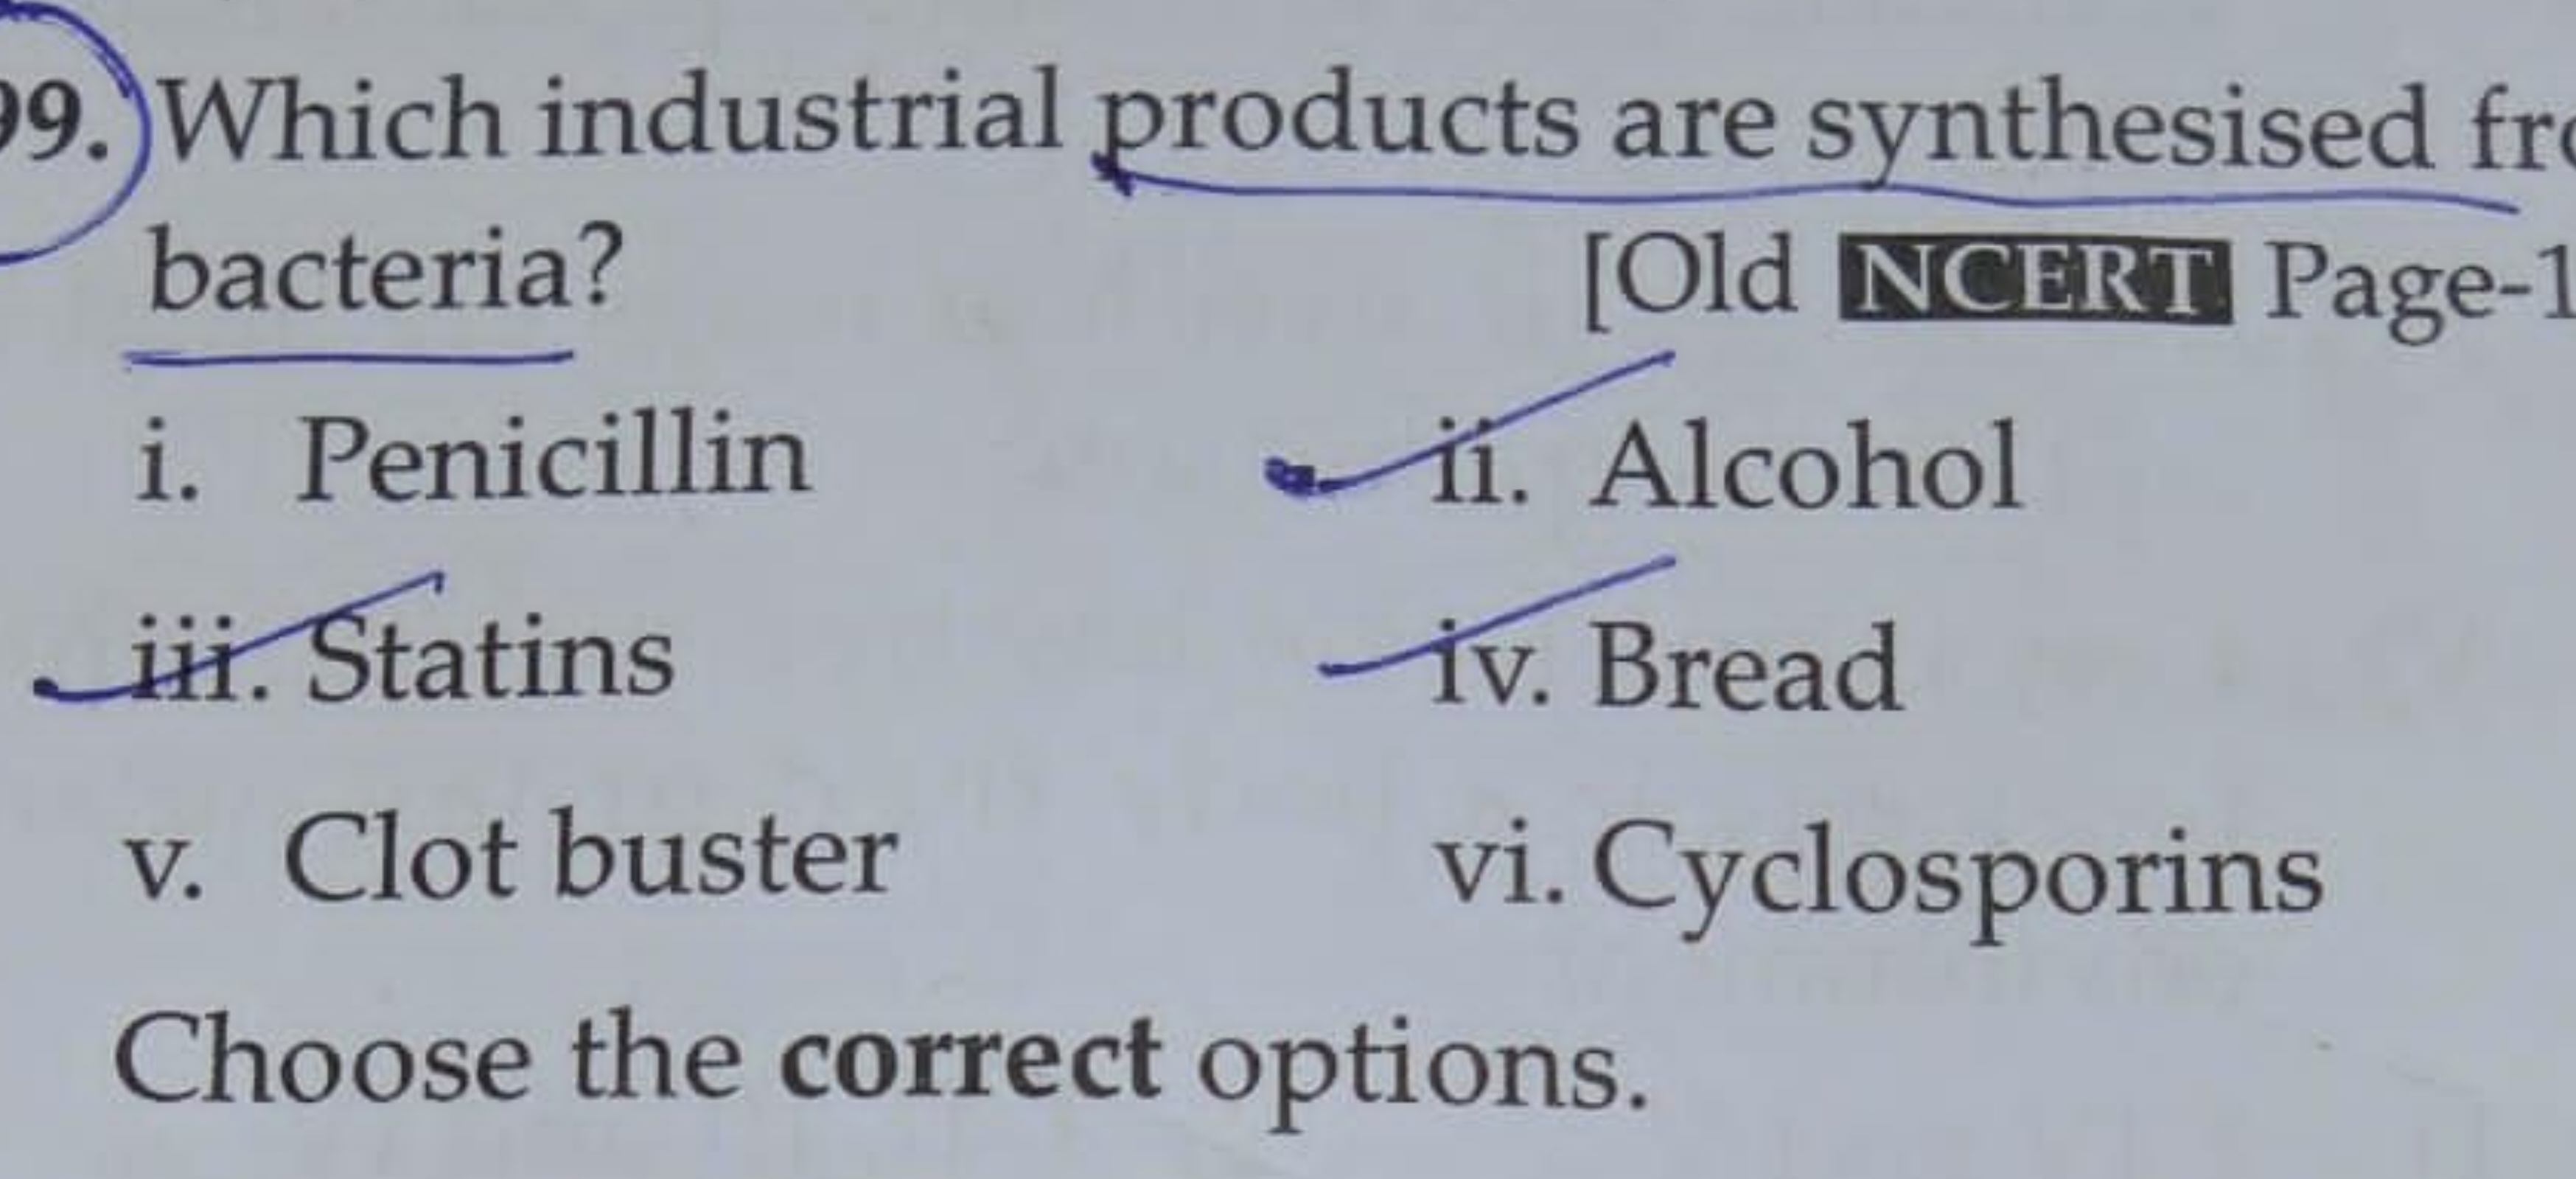 9. Which industrial products are synthesised fr bacteria?
i. Penicilli